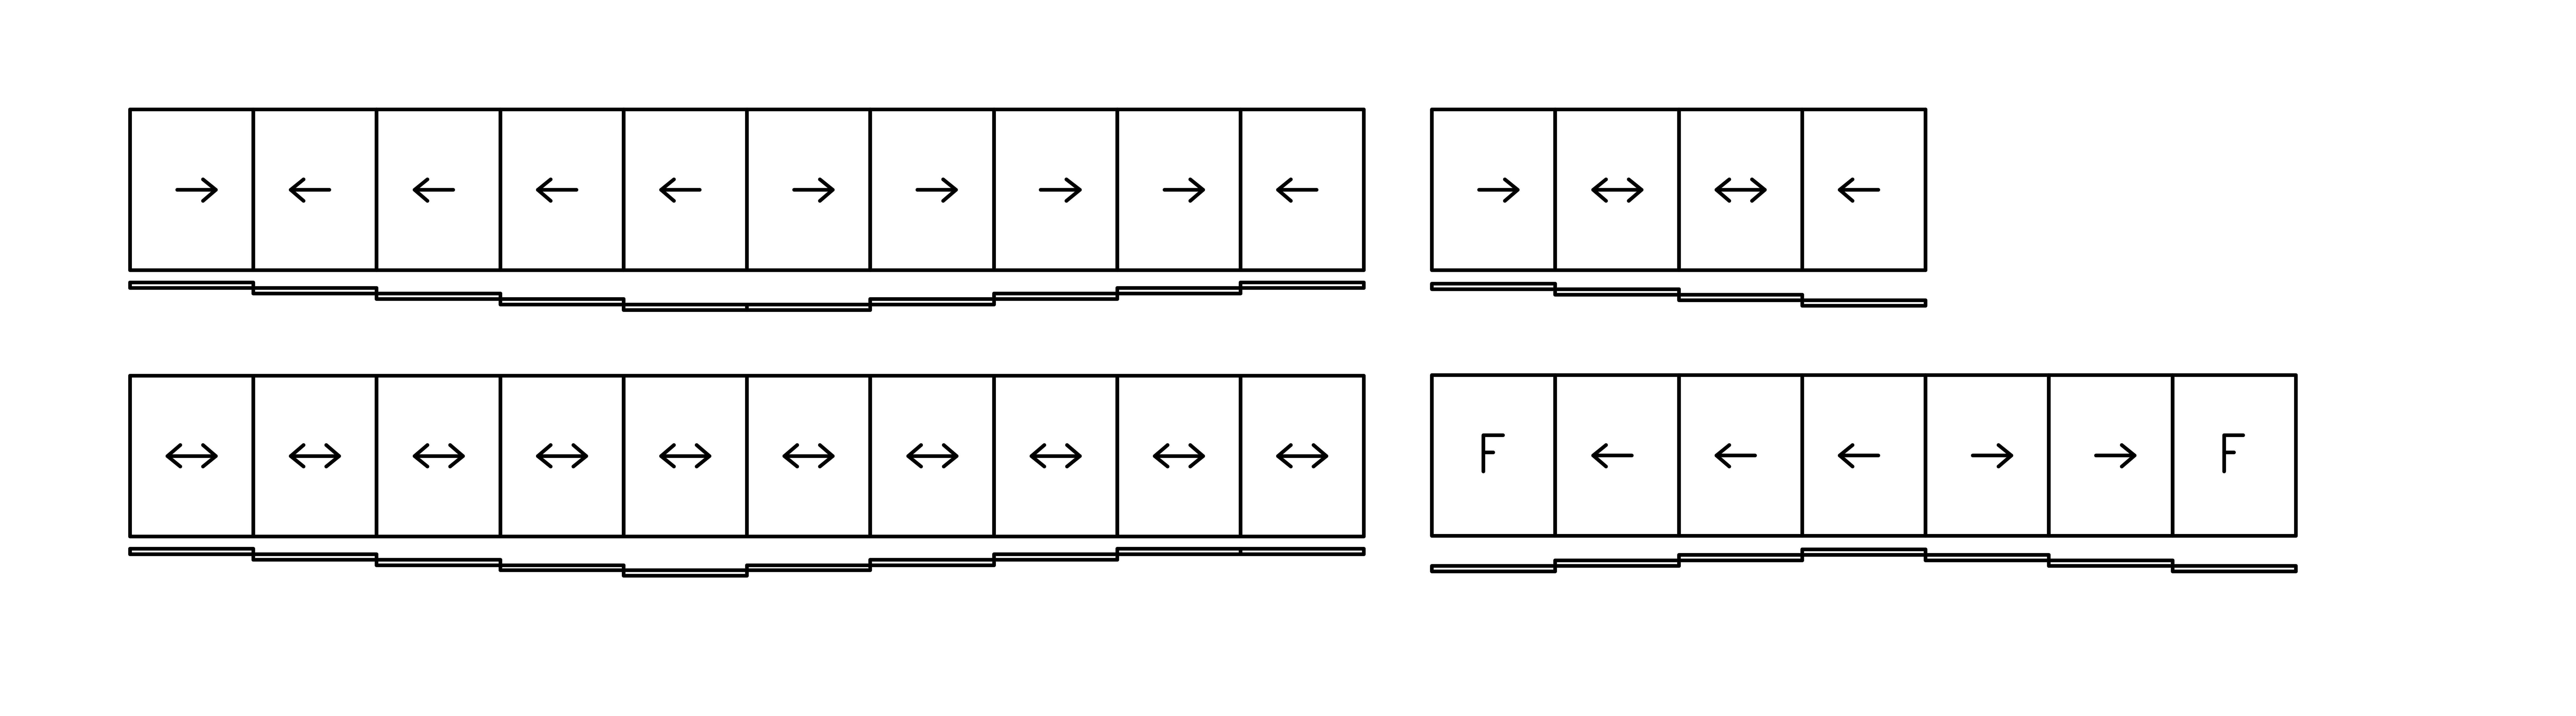 multiple track configurations